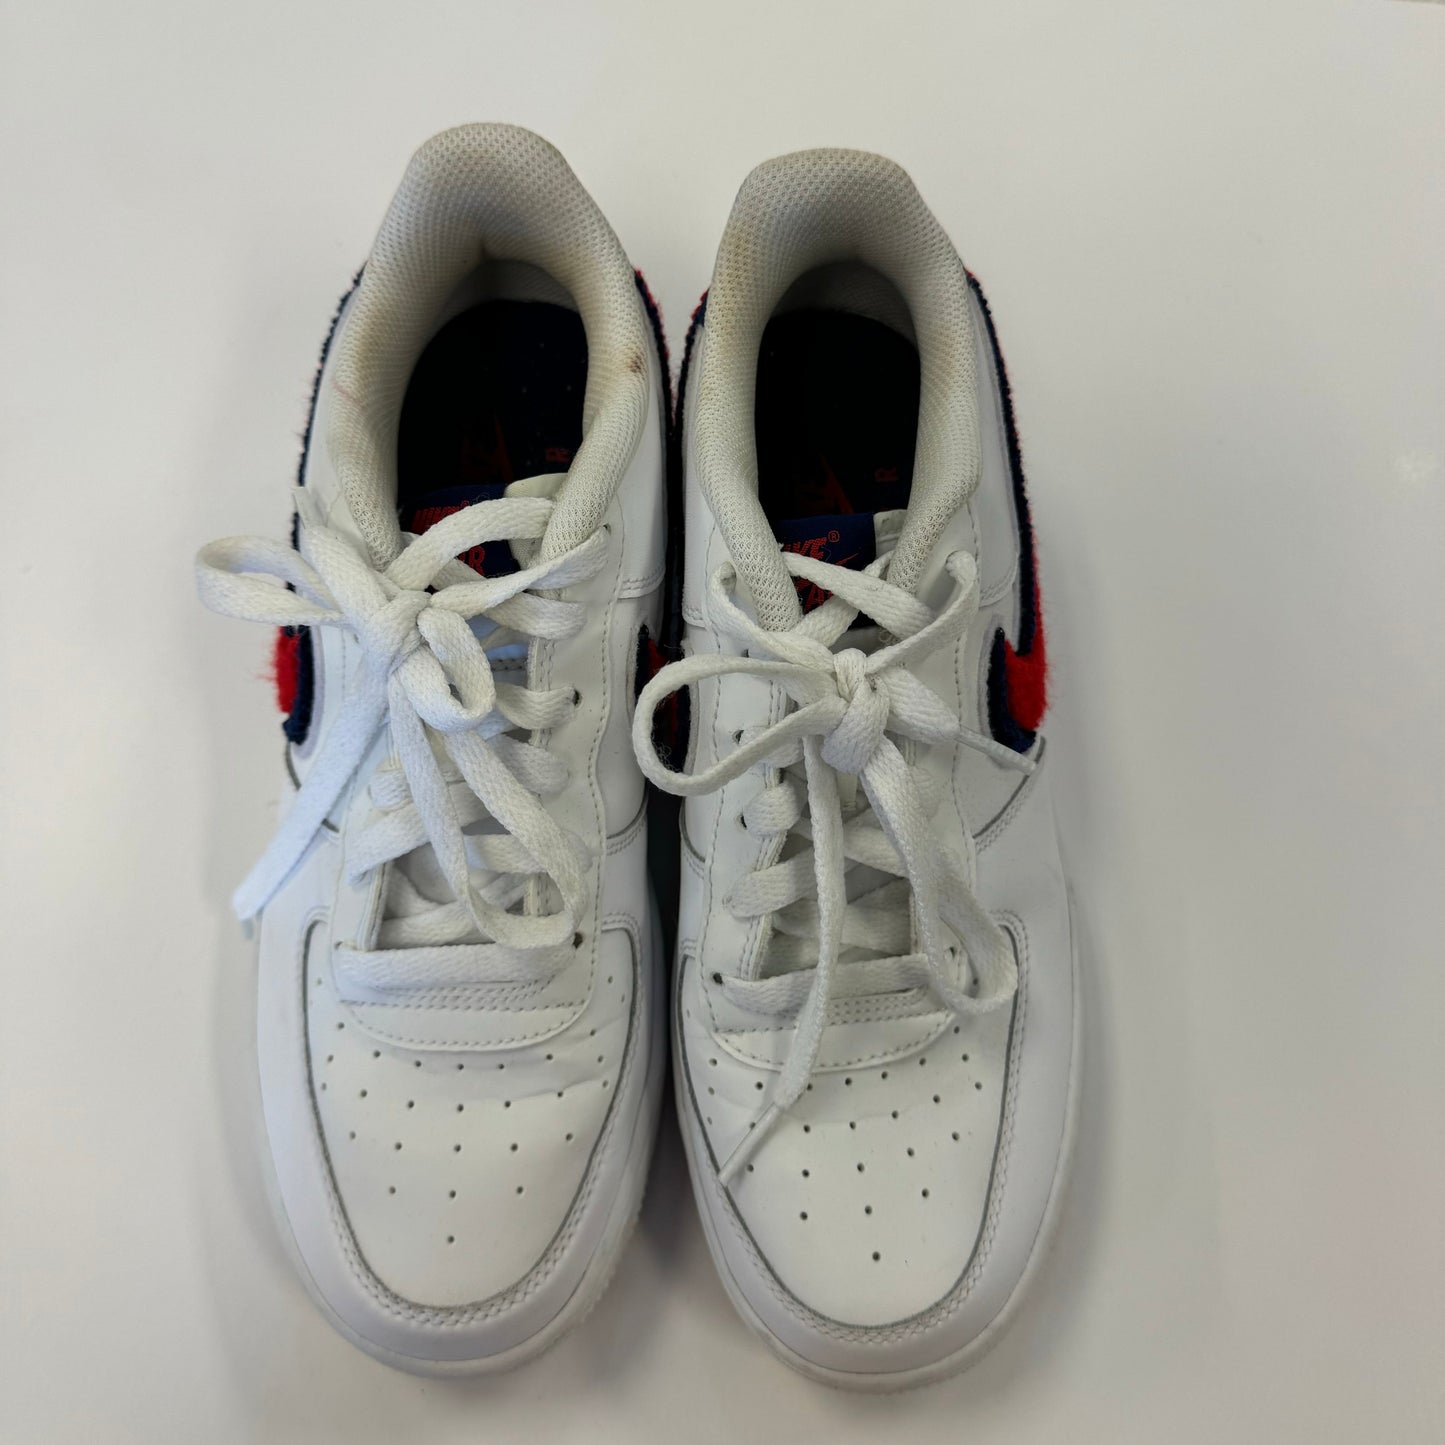 White Shoes Sneakers Nike, Size 7